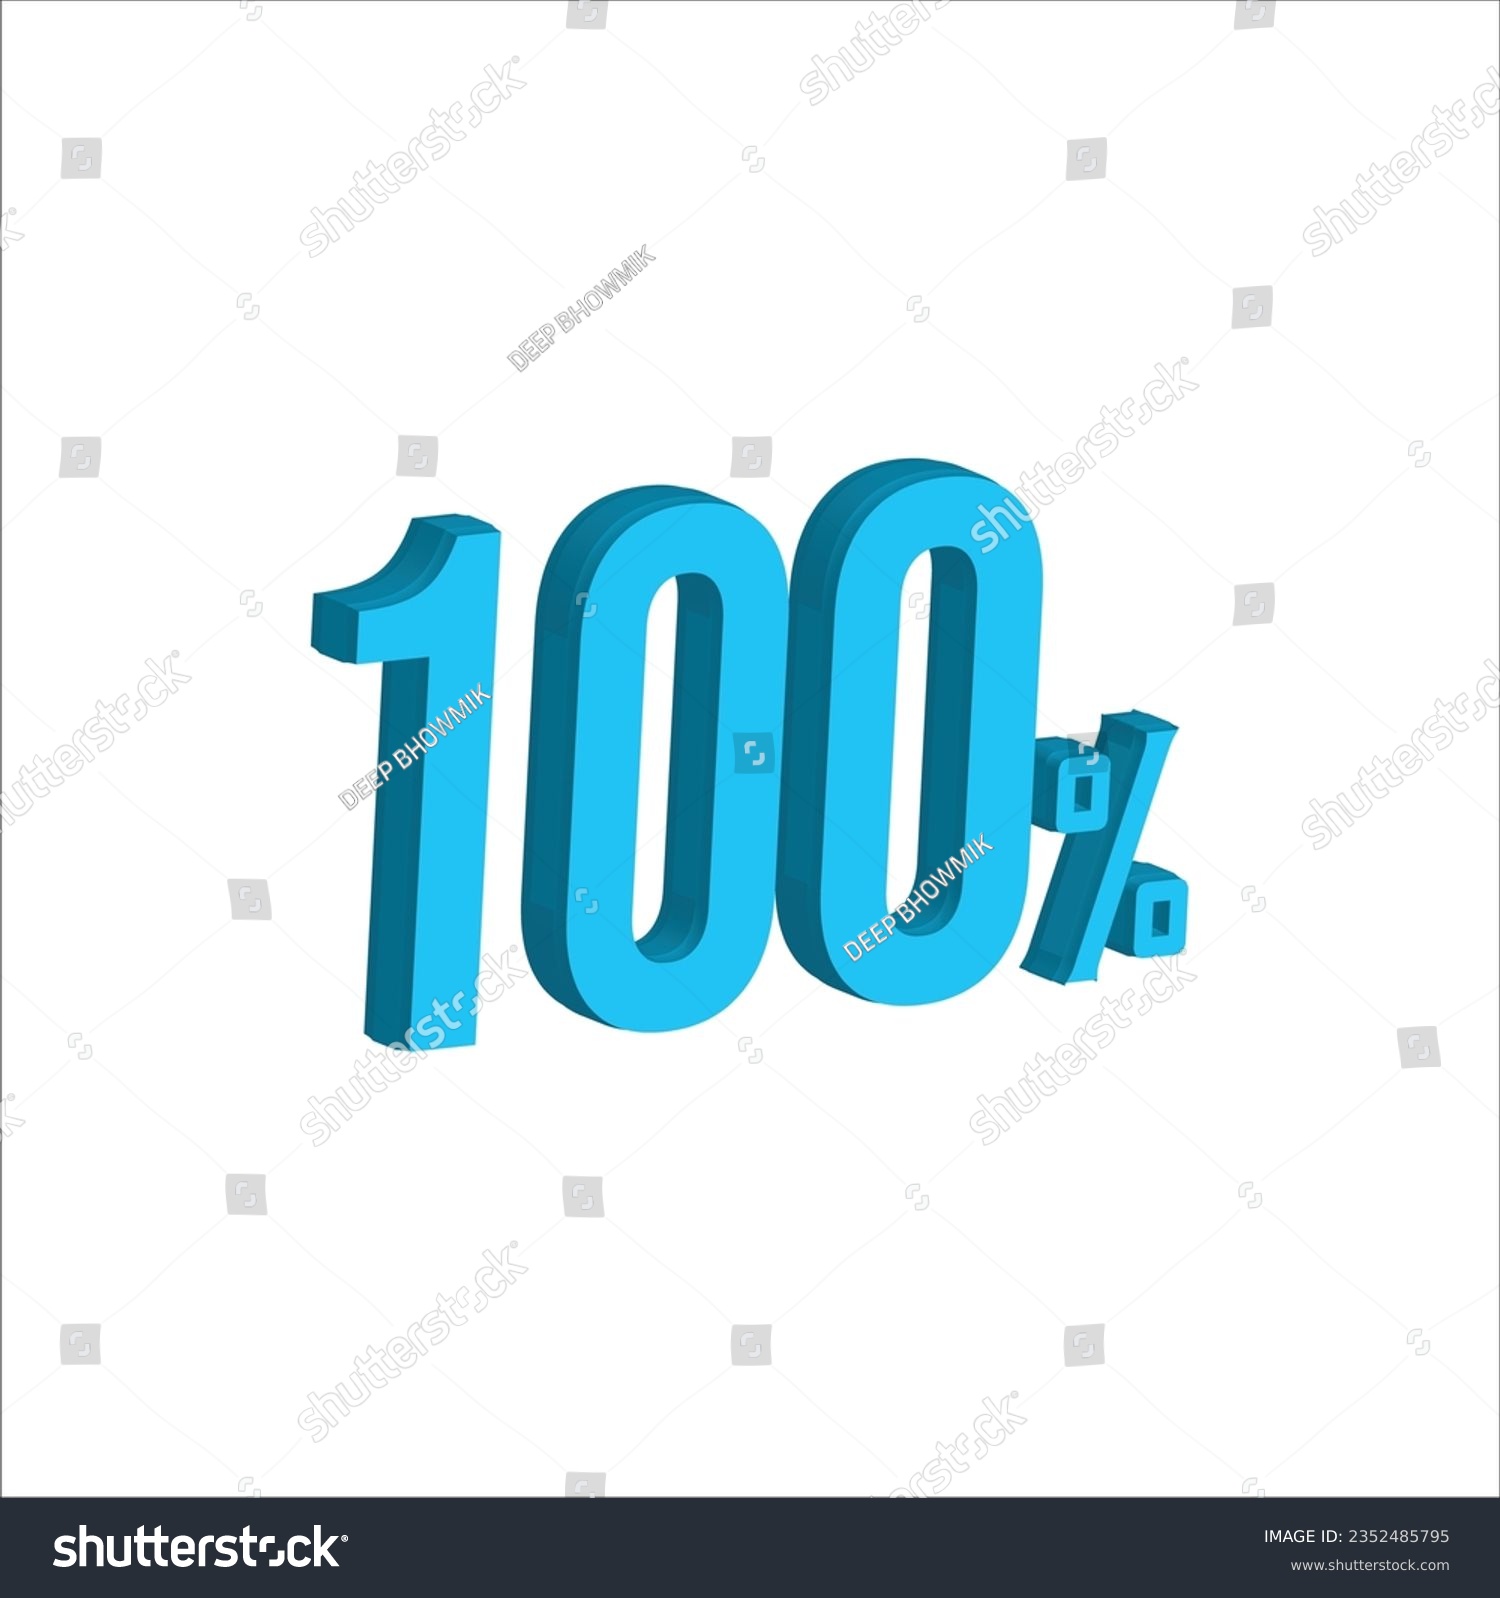 SVG of Sky blue 100% Percent 3d illustration sign on white background have work path. Special Offer 97 Percent Discount Tag. Advertising signs. Product design. Product sales.
 svg